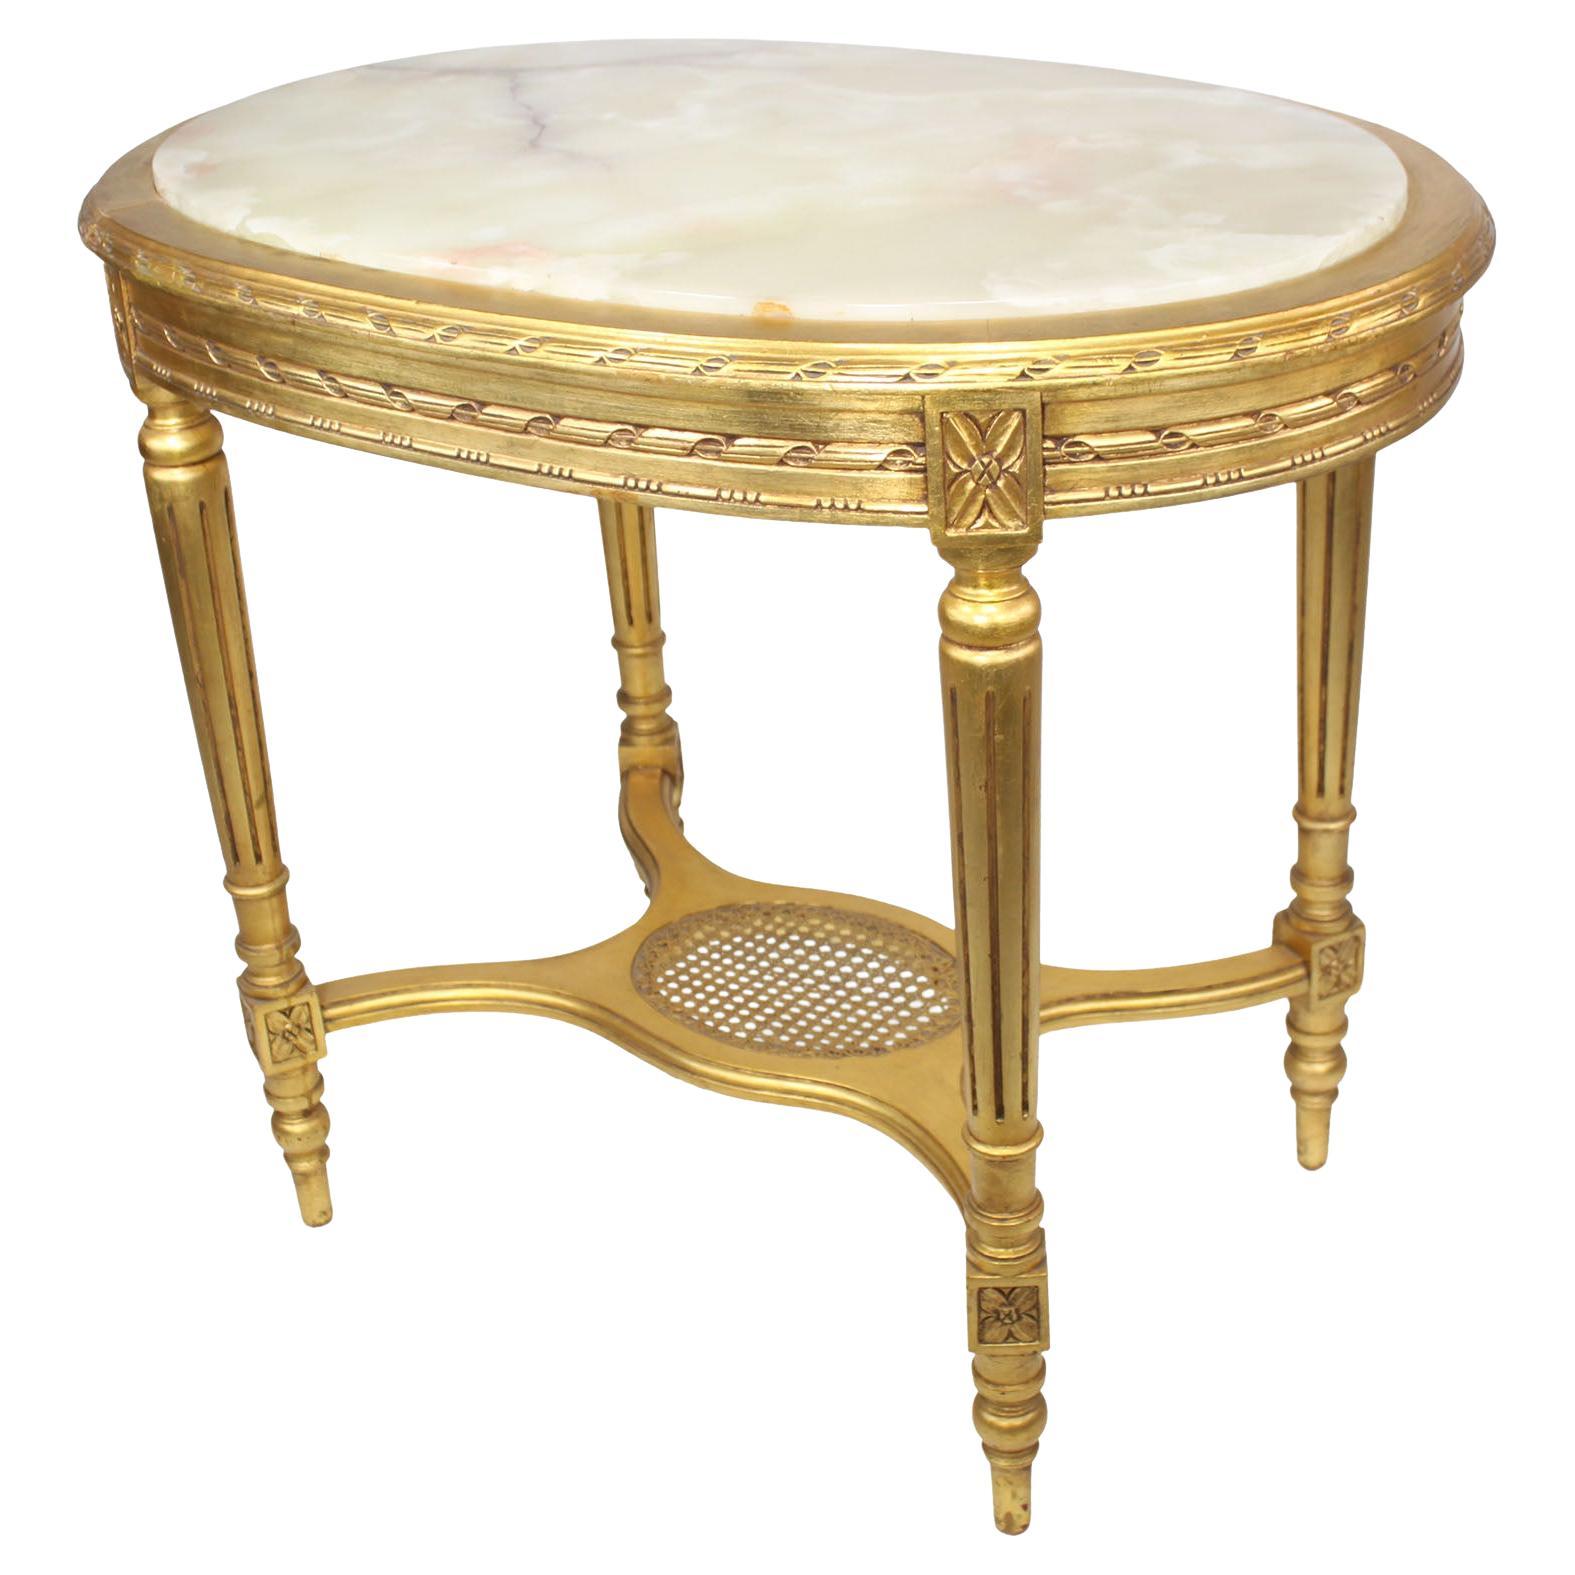 French Louis XVI Style Belle Époque Oval Giltwood Carved Center Table w/Onyx Top For Sale